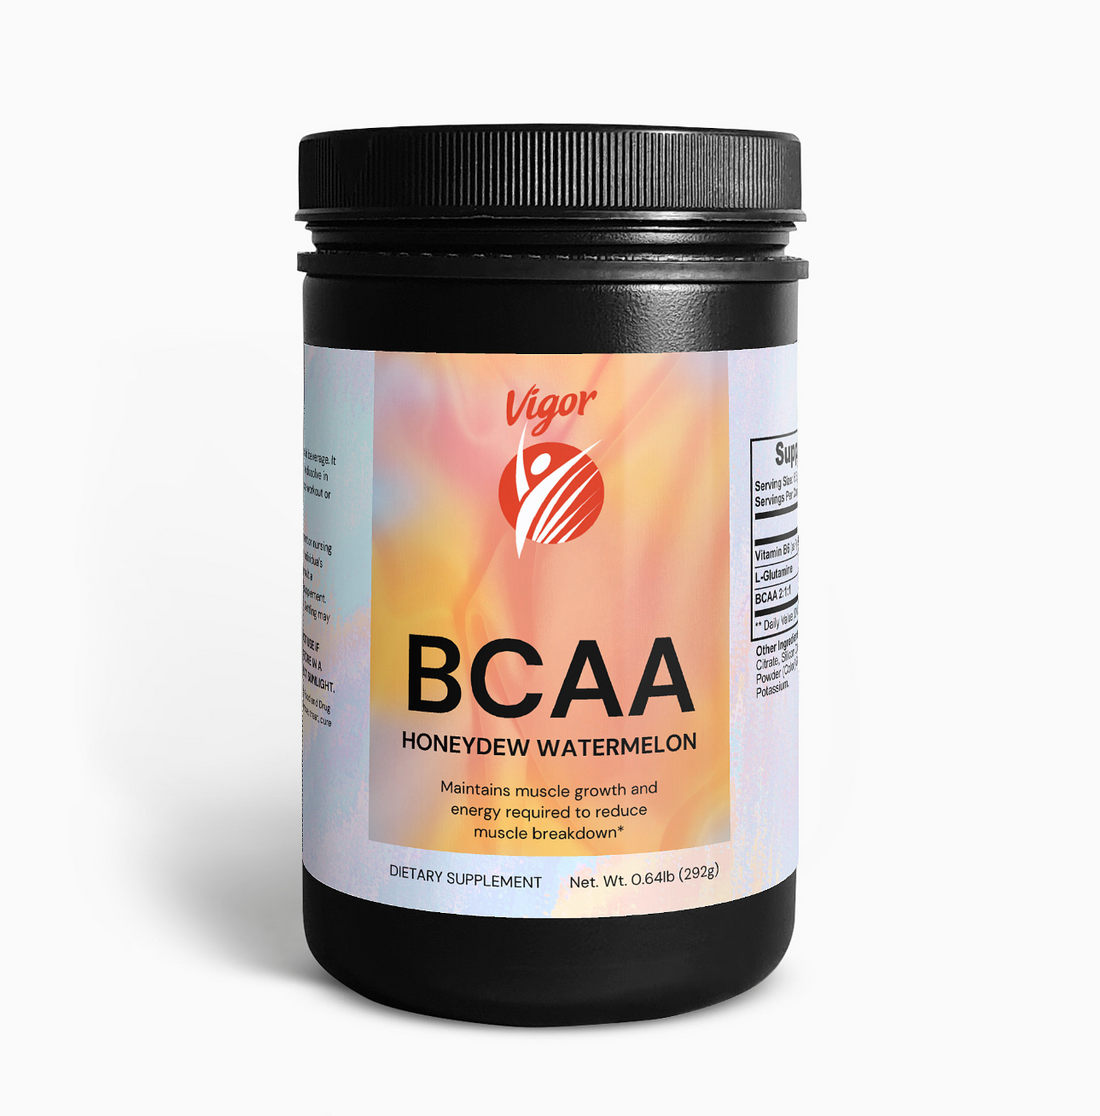 BCAA Post Workout Powder maintains muscle growth and energy required to reduce muscle breakdown after an intense workout. 